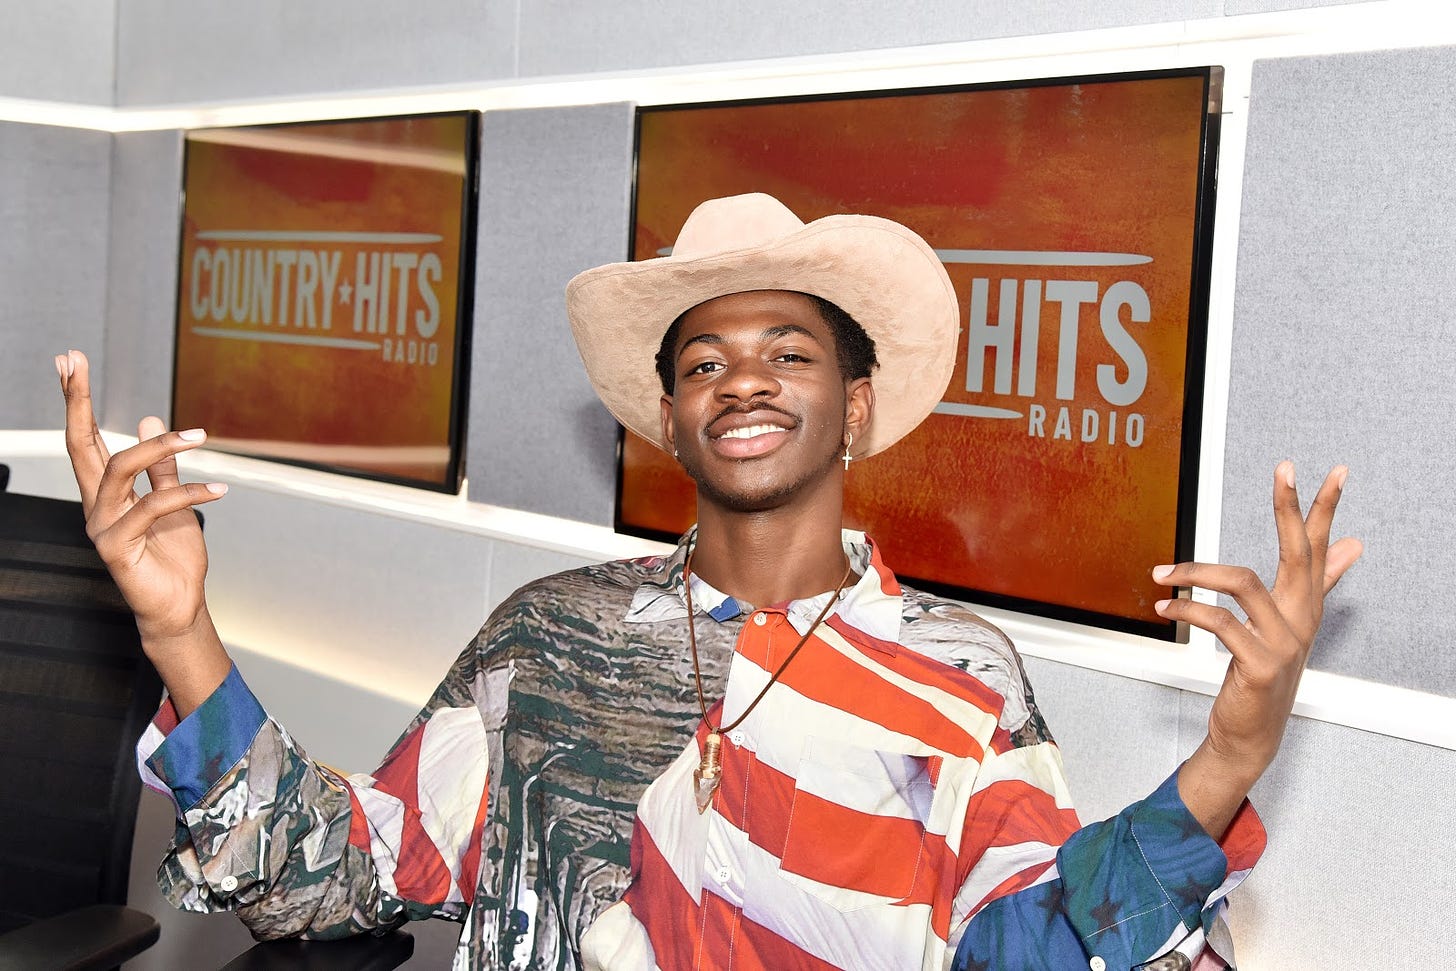 Photo of Lil Nas X wearing an American flag button down and cowboy hat, sitting in front of two televisions that display a "Country Hits Radio" emblem.